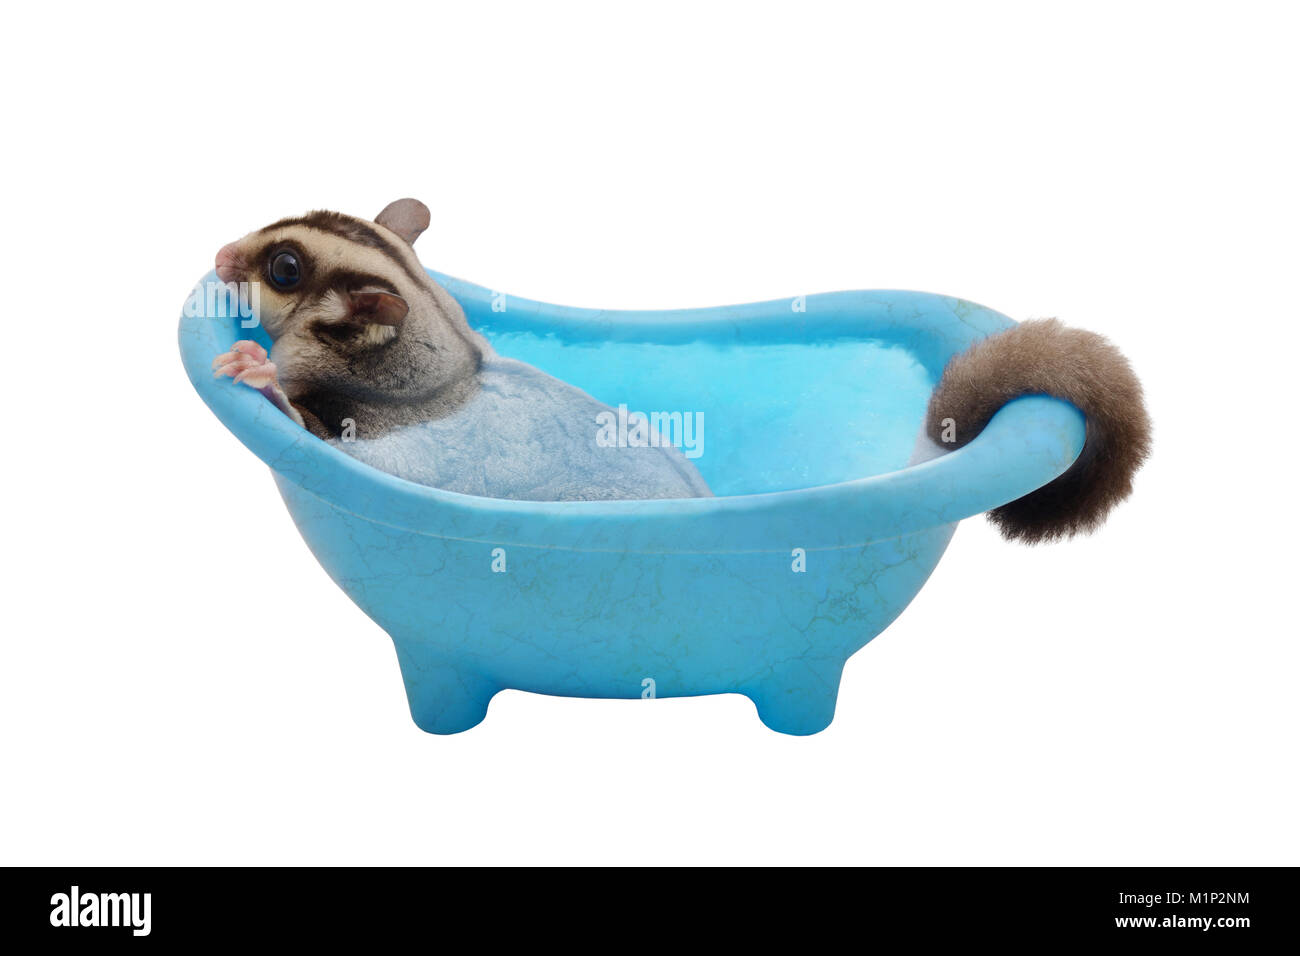 Suger glider cleaning itself by soaking in blue bathtub on white background. Stock Photo